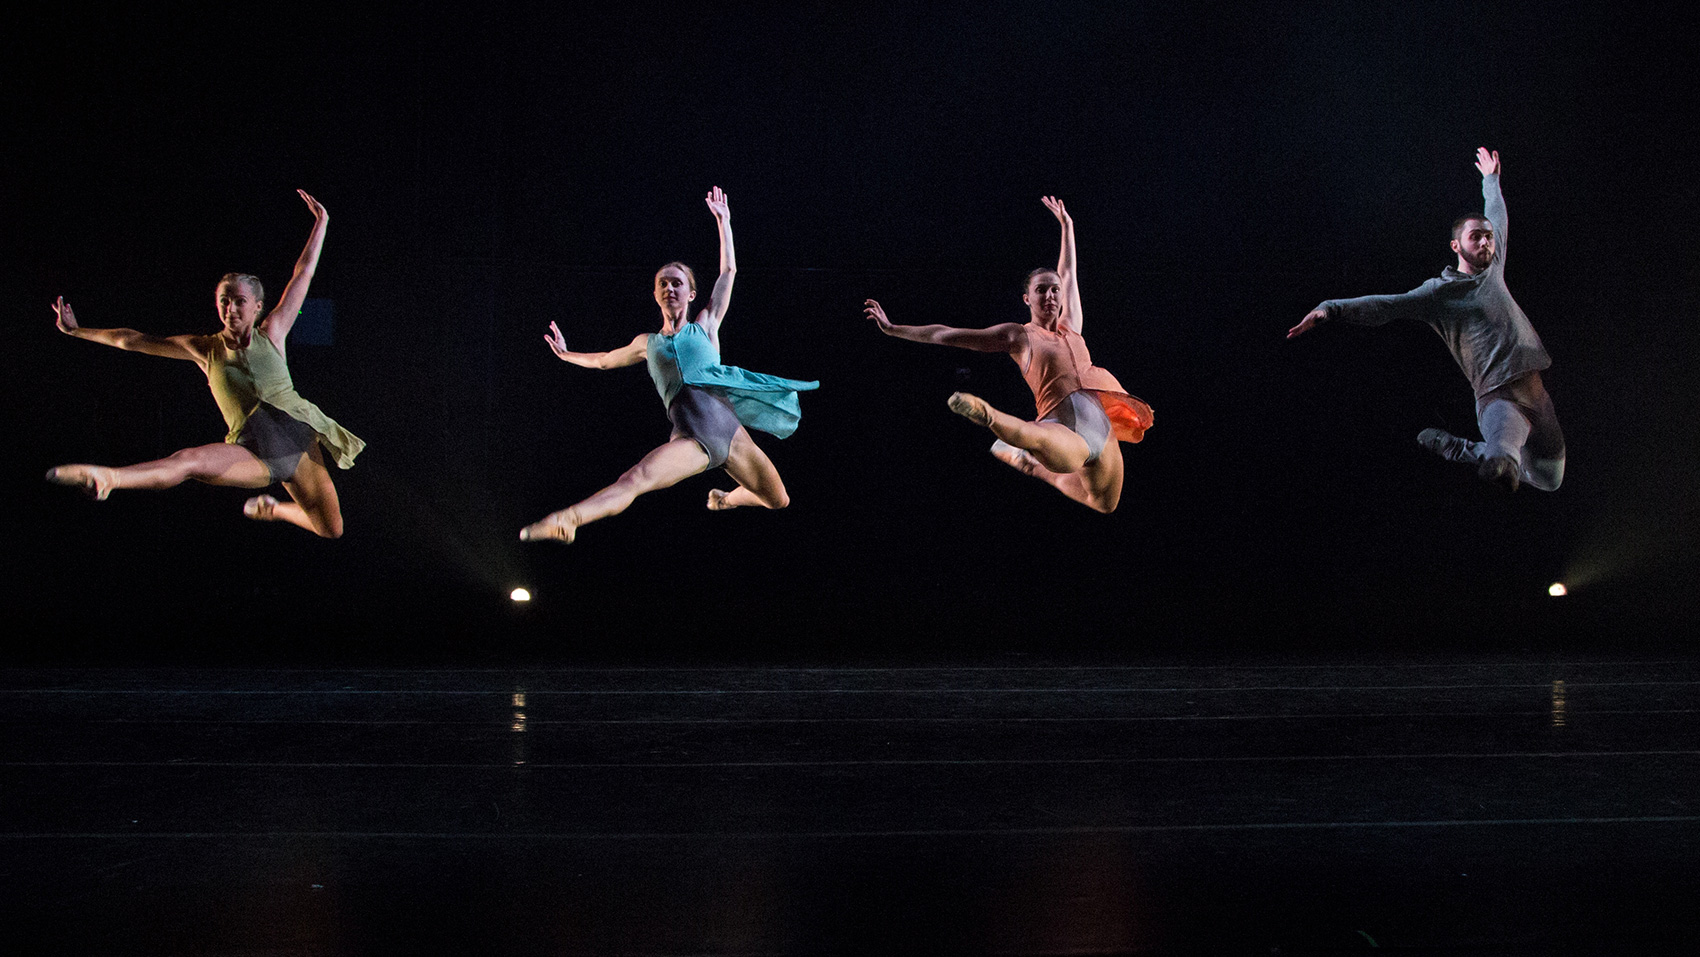 Five dancers in different colored clothes are in mid jump on stage.